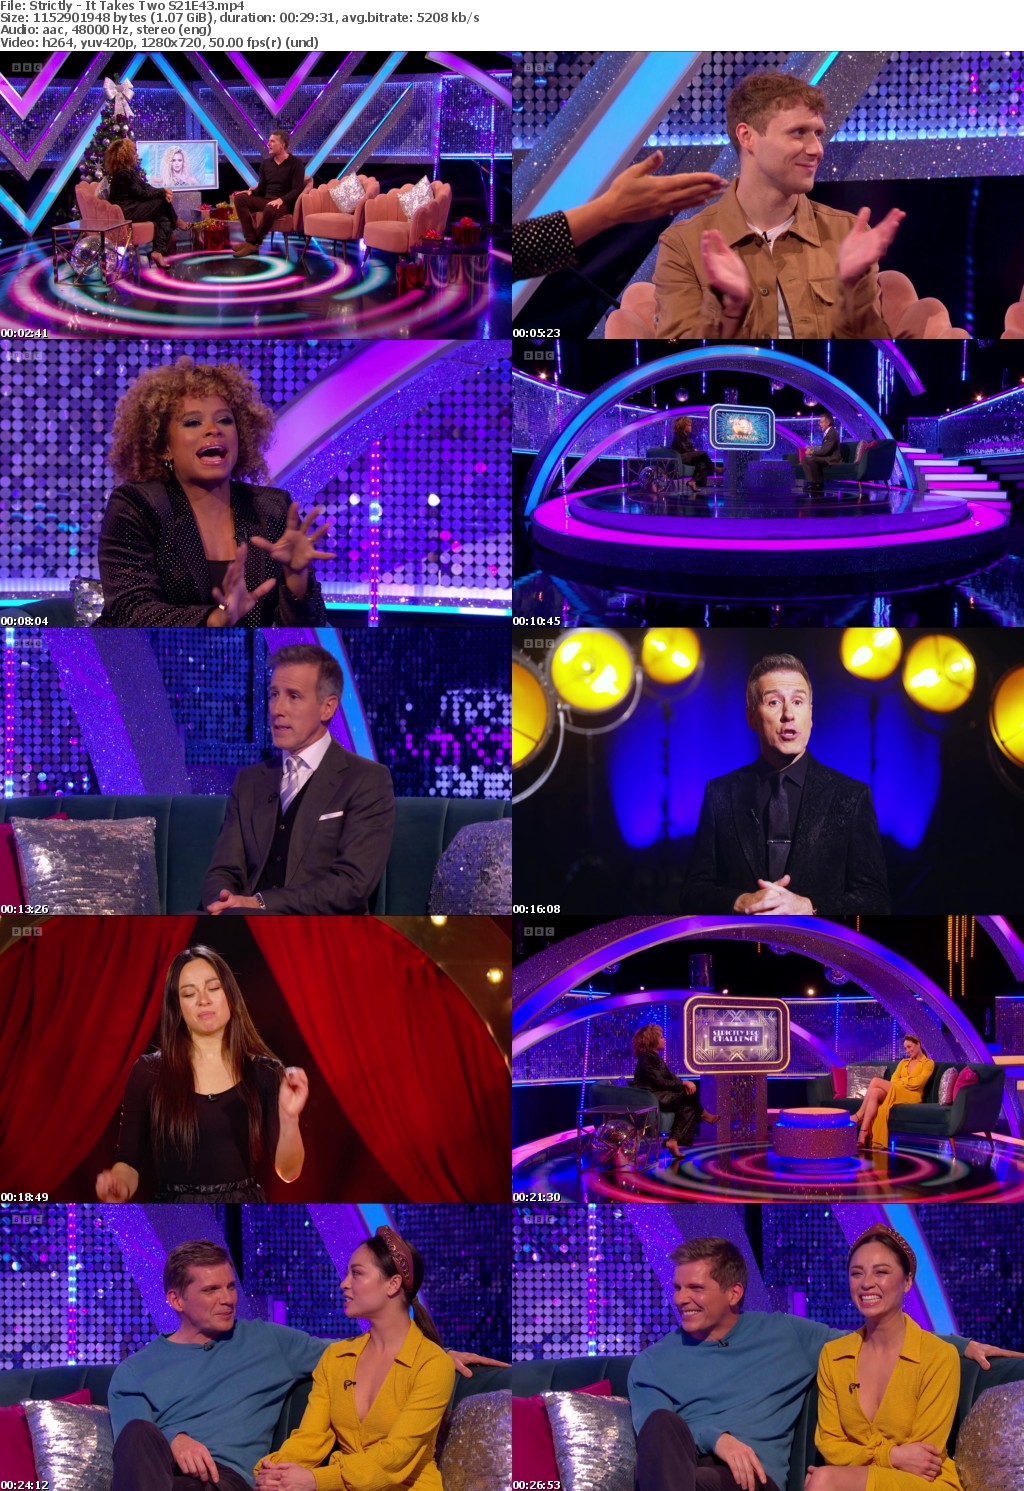 Strictly - It Takes Two S21E43 (1280x720p HD, 50fps, soft Eng subs)